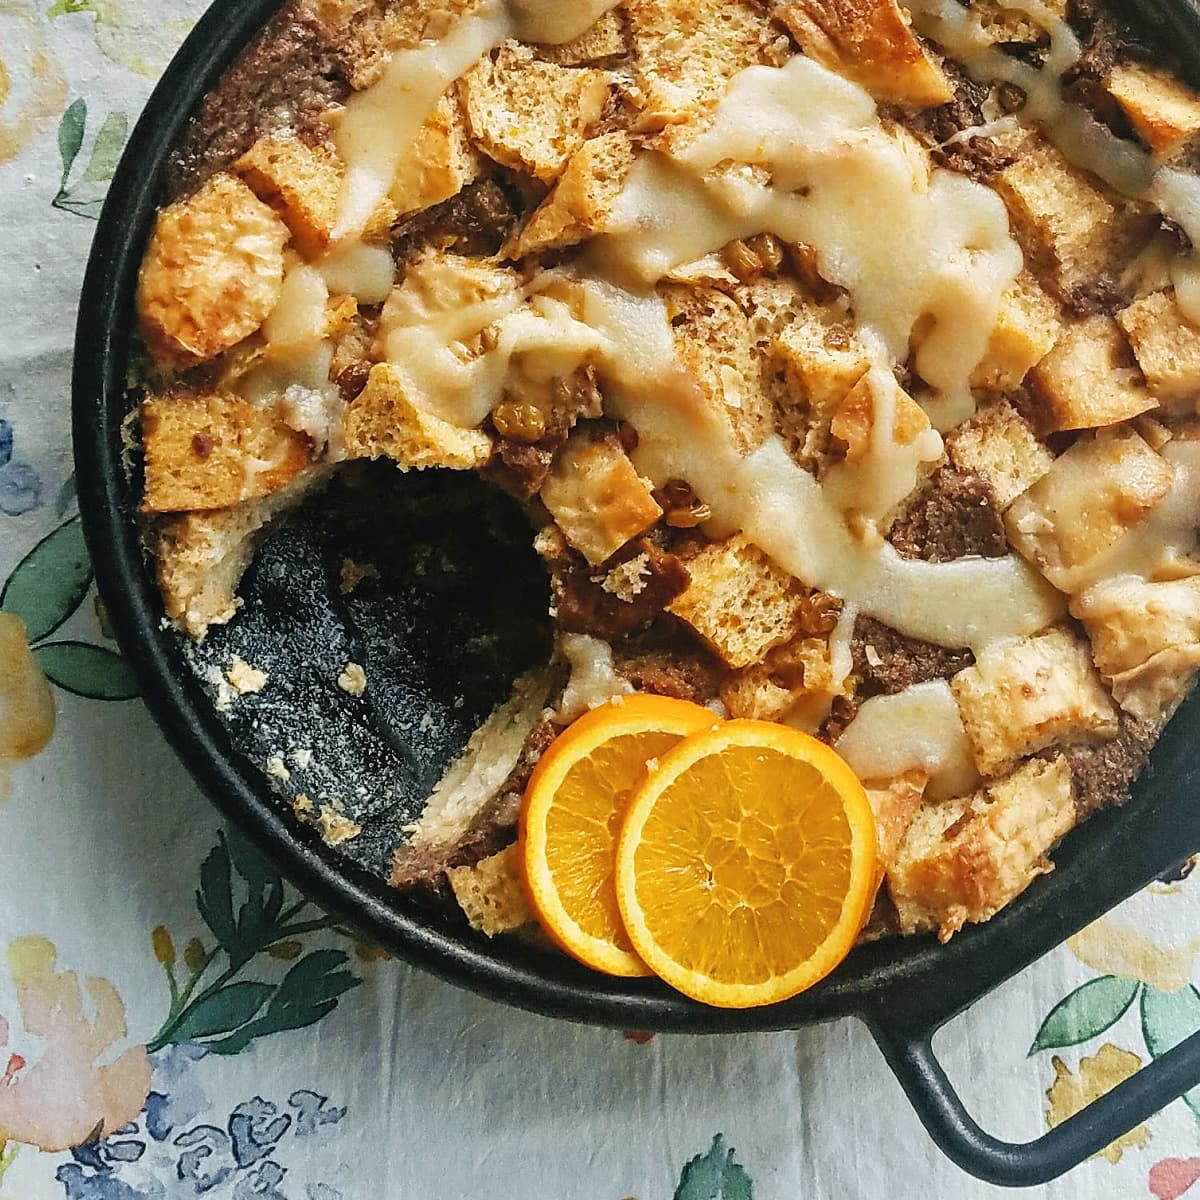 Bread pudding in a cast iron skillet, garnished with orange slices, with one serving removed.